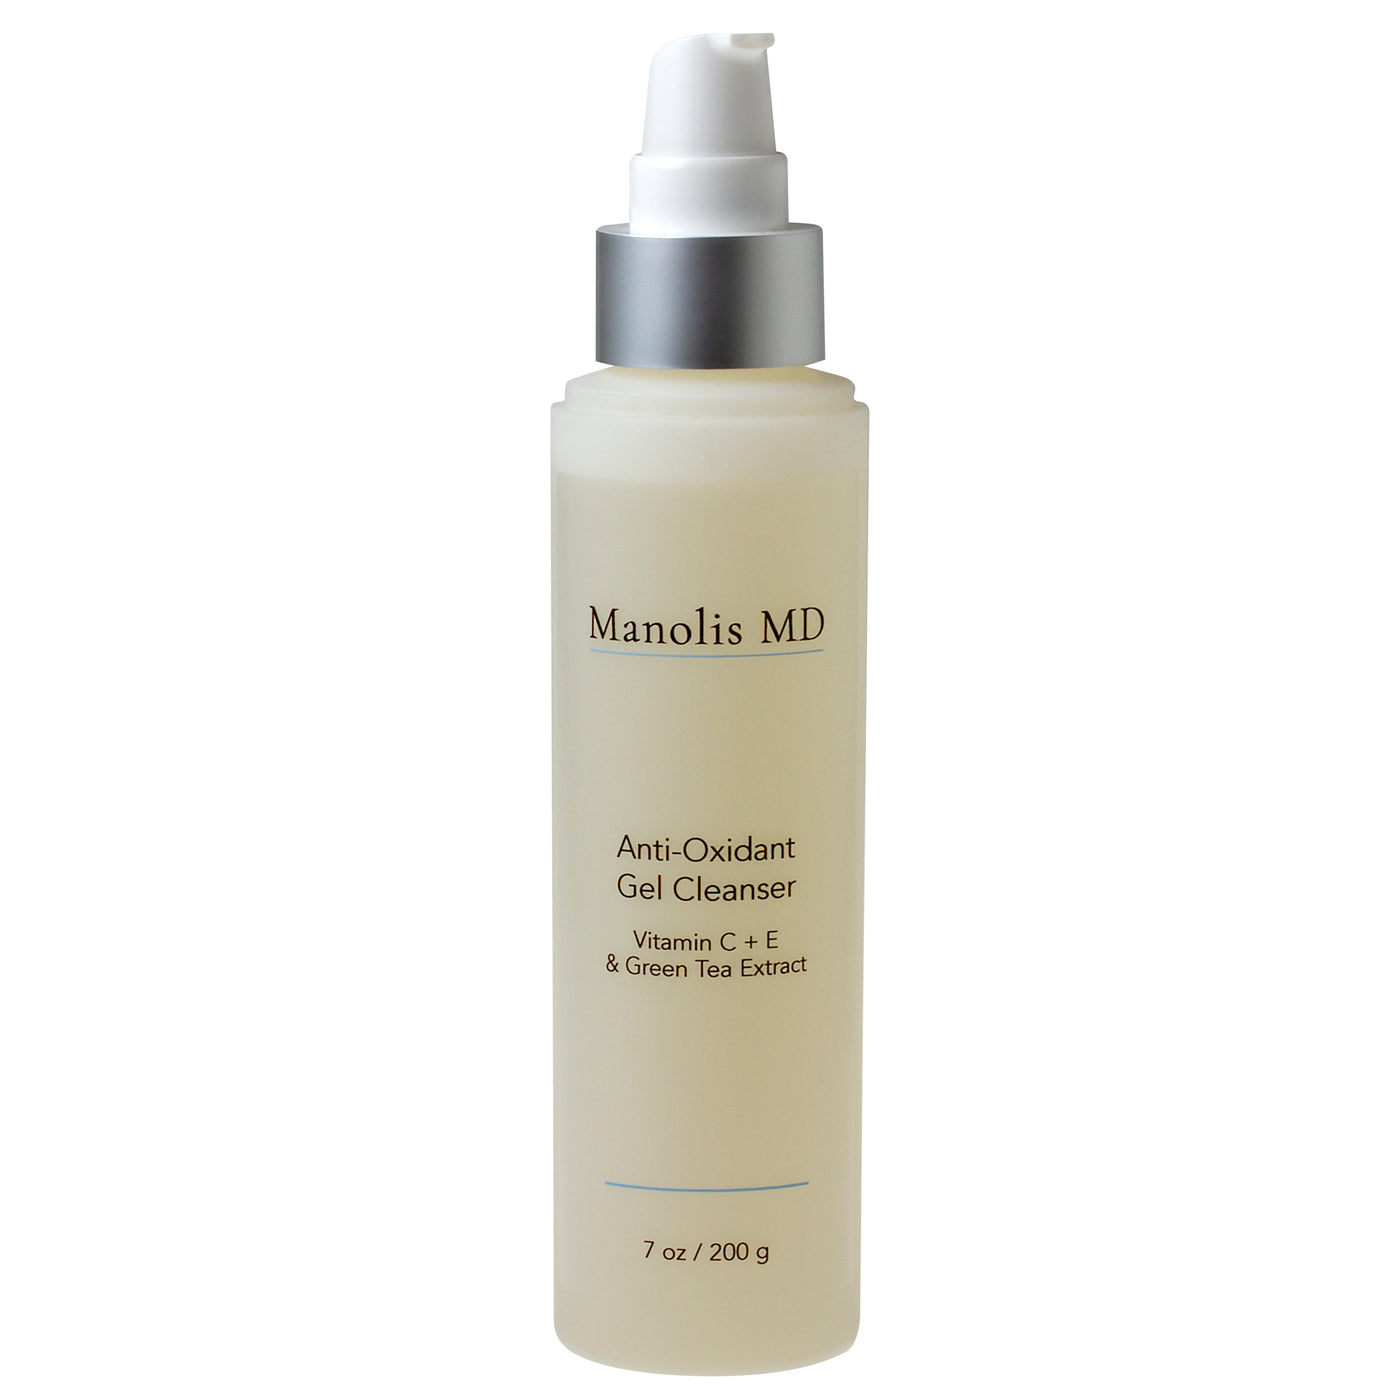 The Antioxidant Gel Cleanser contains non-acidic, emollient esters of Vitamin C and Vitamin E, along with Green Tea Extract. This cleanser is fragrance and paraben free. 